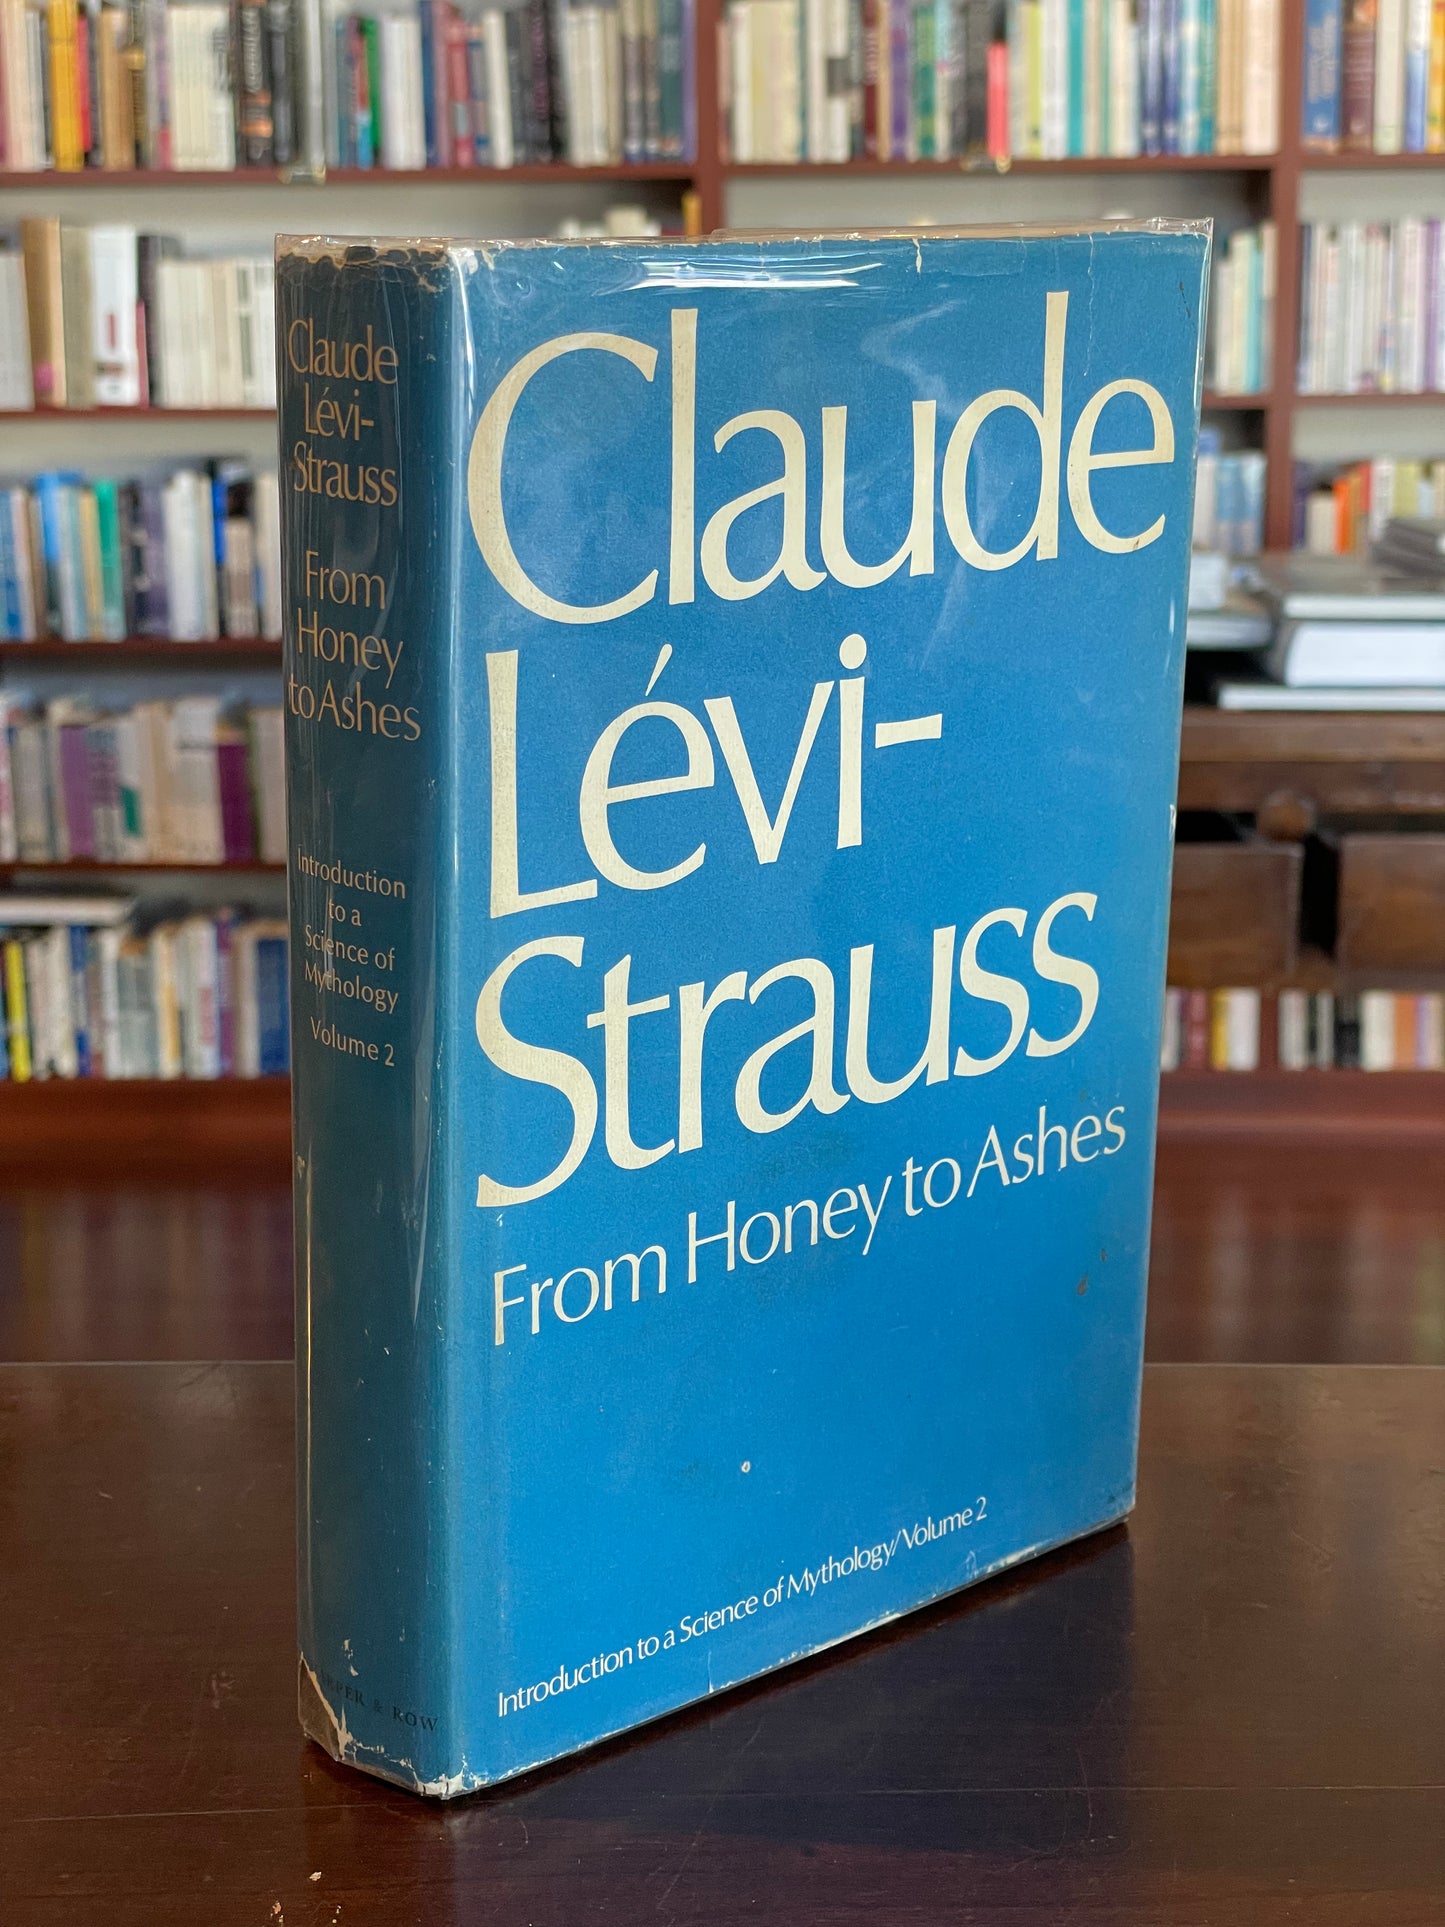 From Honey to Ashes by Claude Lévi-Strauss